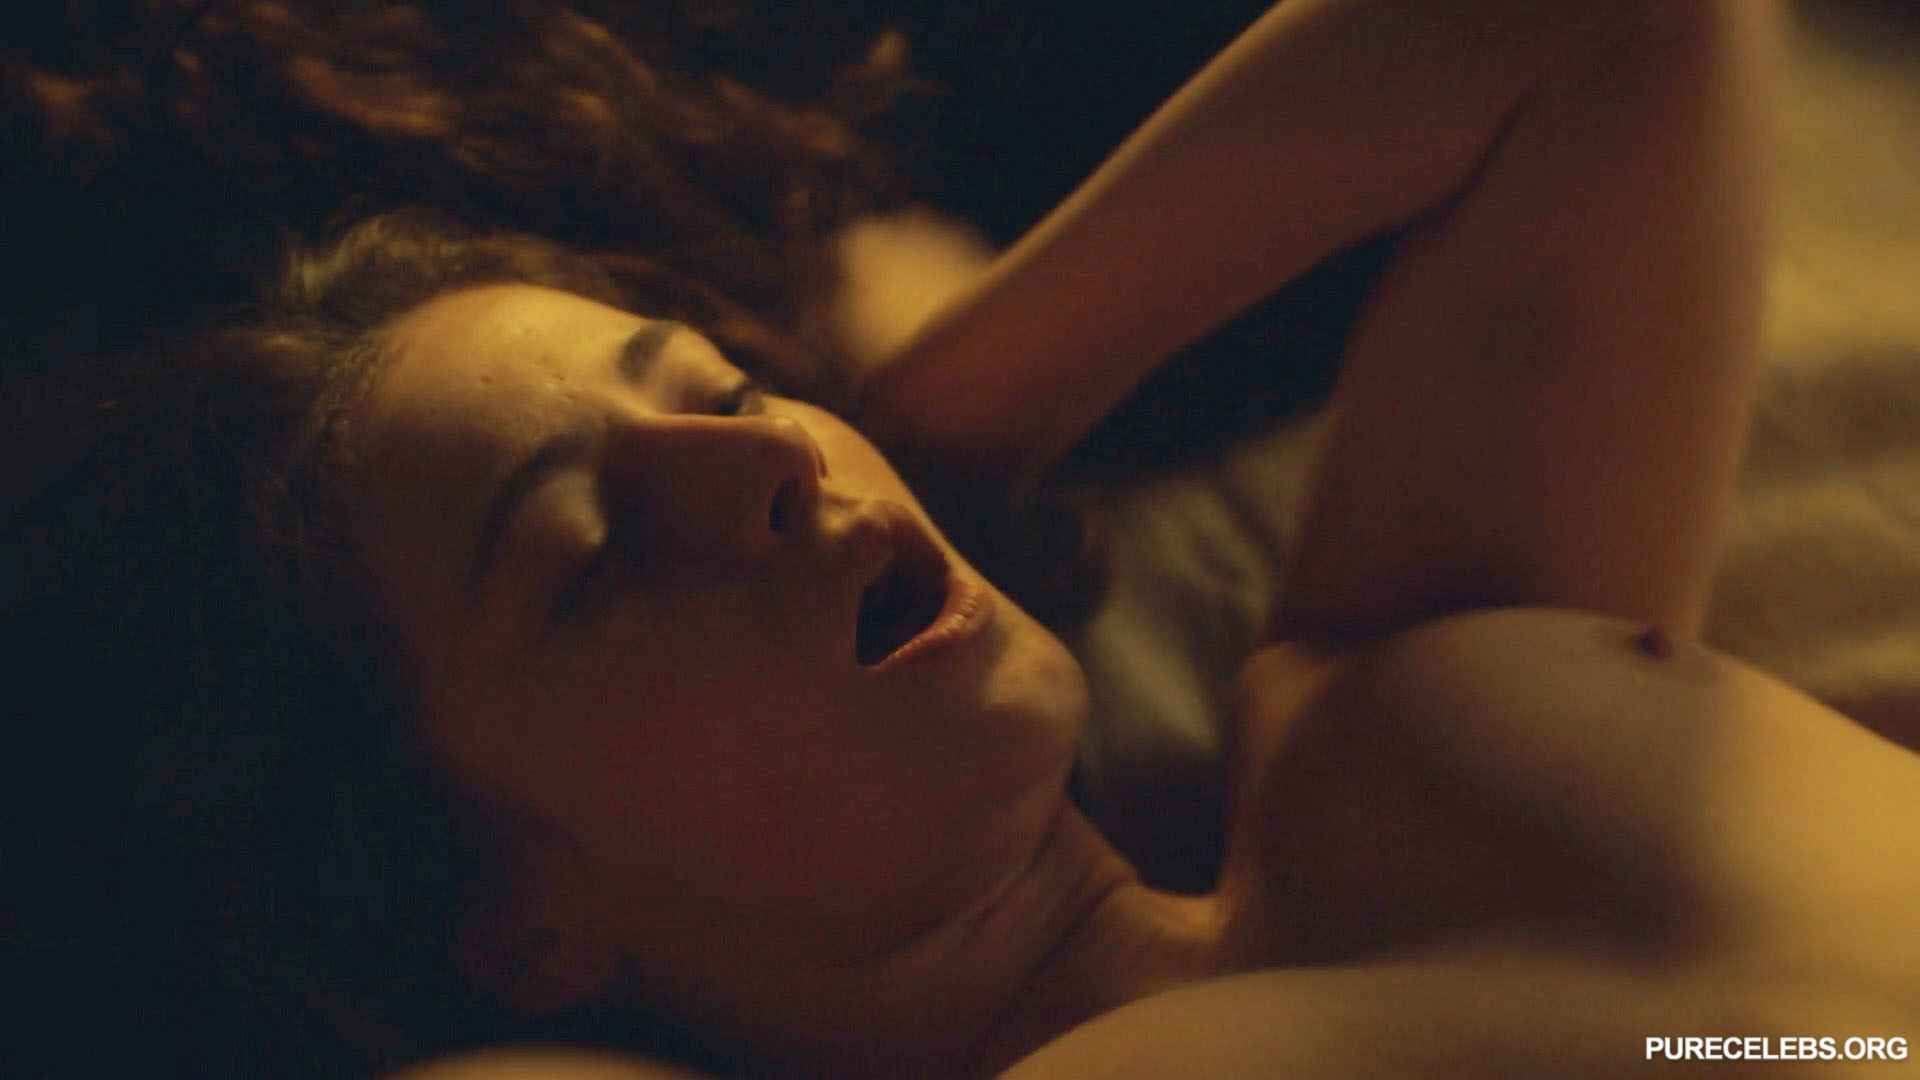 British actress Millie Brady starred in nude and sex scenes in the series T...